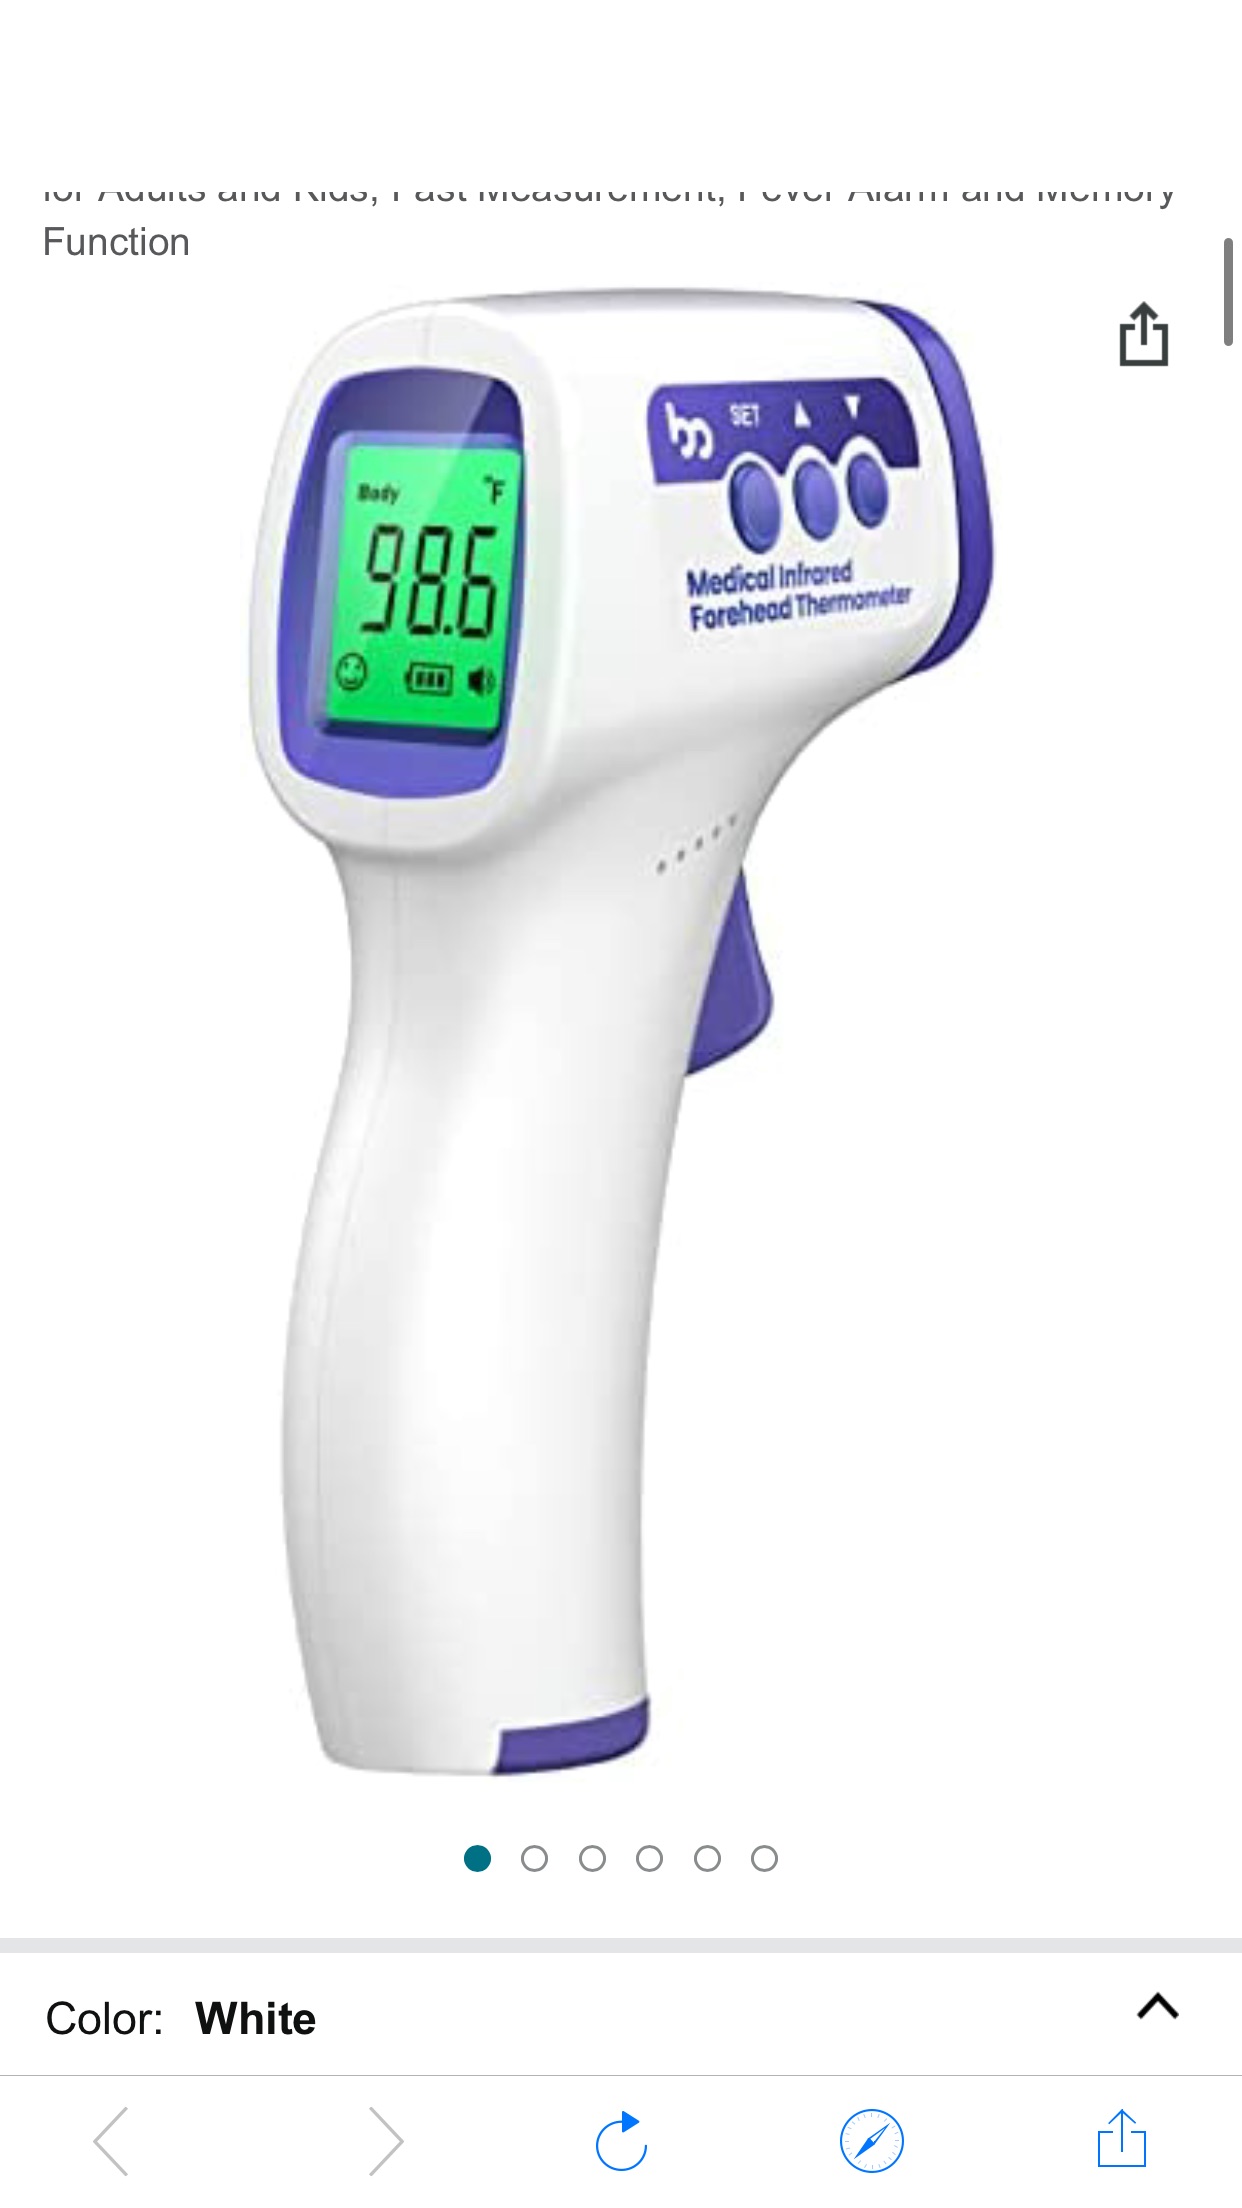 Amazon.com: No-Contact Digital Infrared Thermometer, Forehead Thermometer for Adults and Kids, Fast Measurement, Fever Alarm and Memory Function : Baby